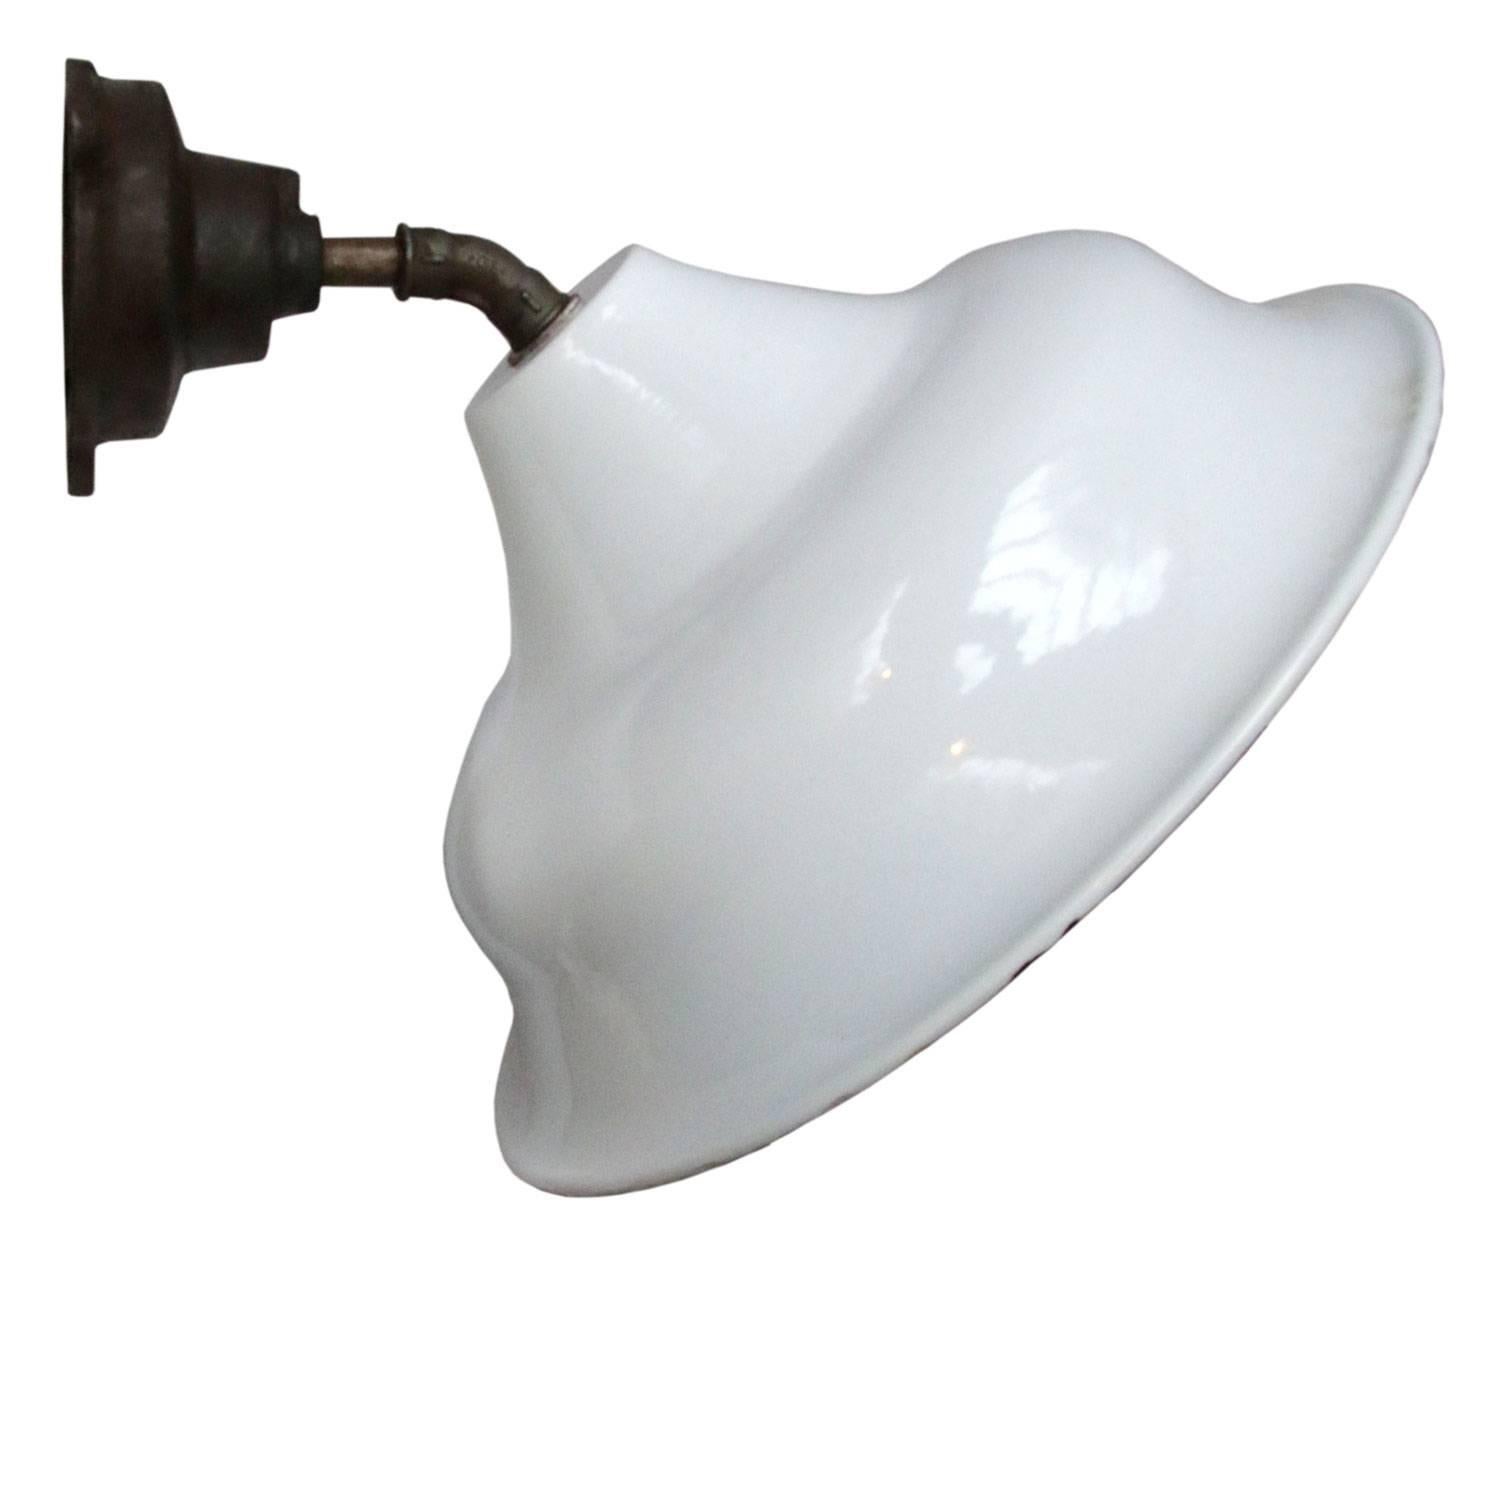 White factory wall light
45 degrees. White enamel, white interior. Cast iron arm and wall base.

Diameter cast iron wall piece: 12 cm, 3 holes to secure

Weight: 3.9 kg / 8.6 lb

All lamps have been made suitable by international standards for